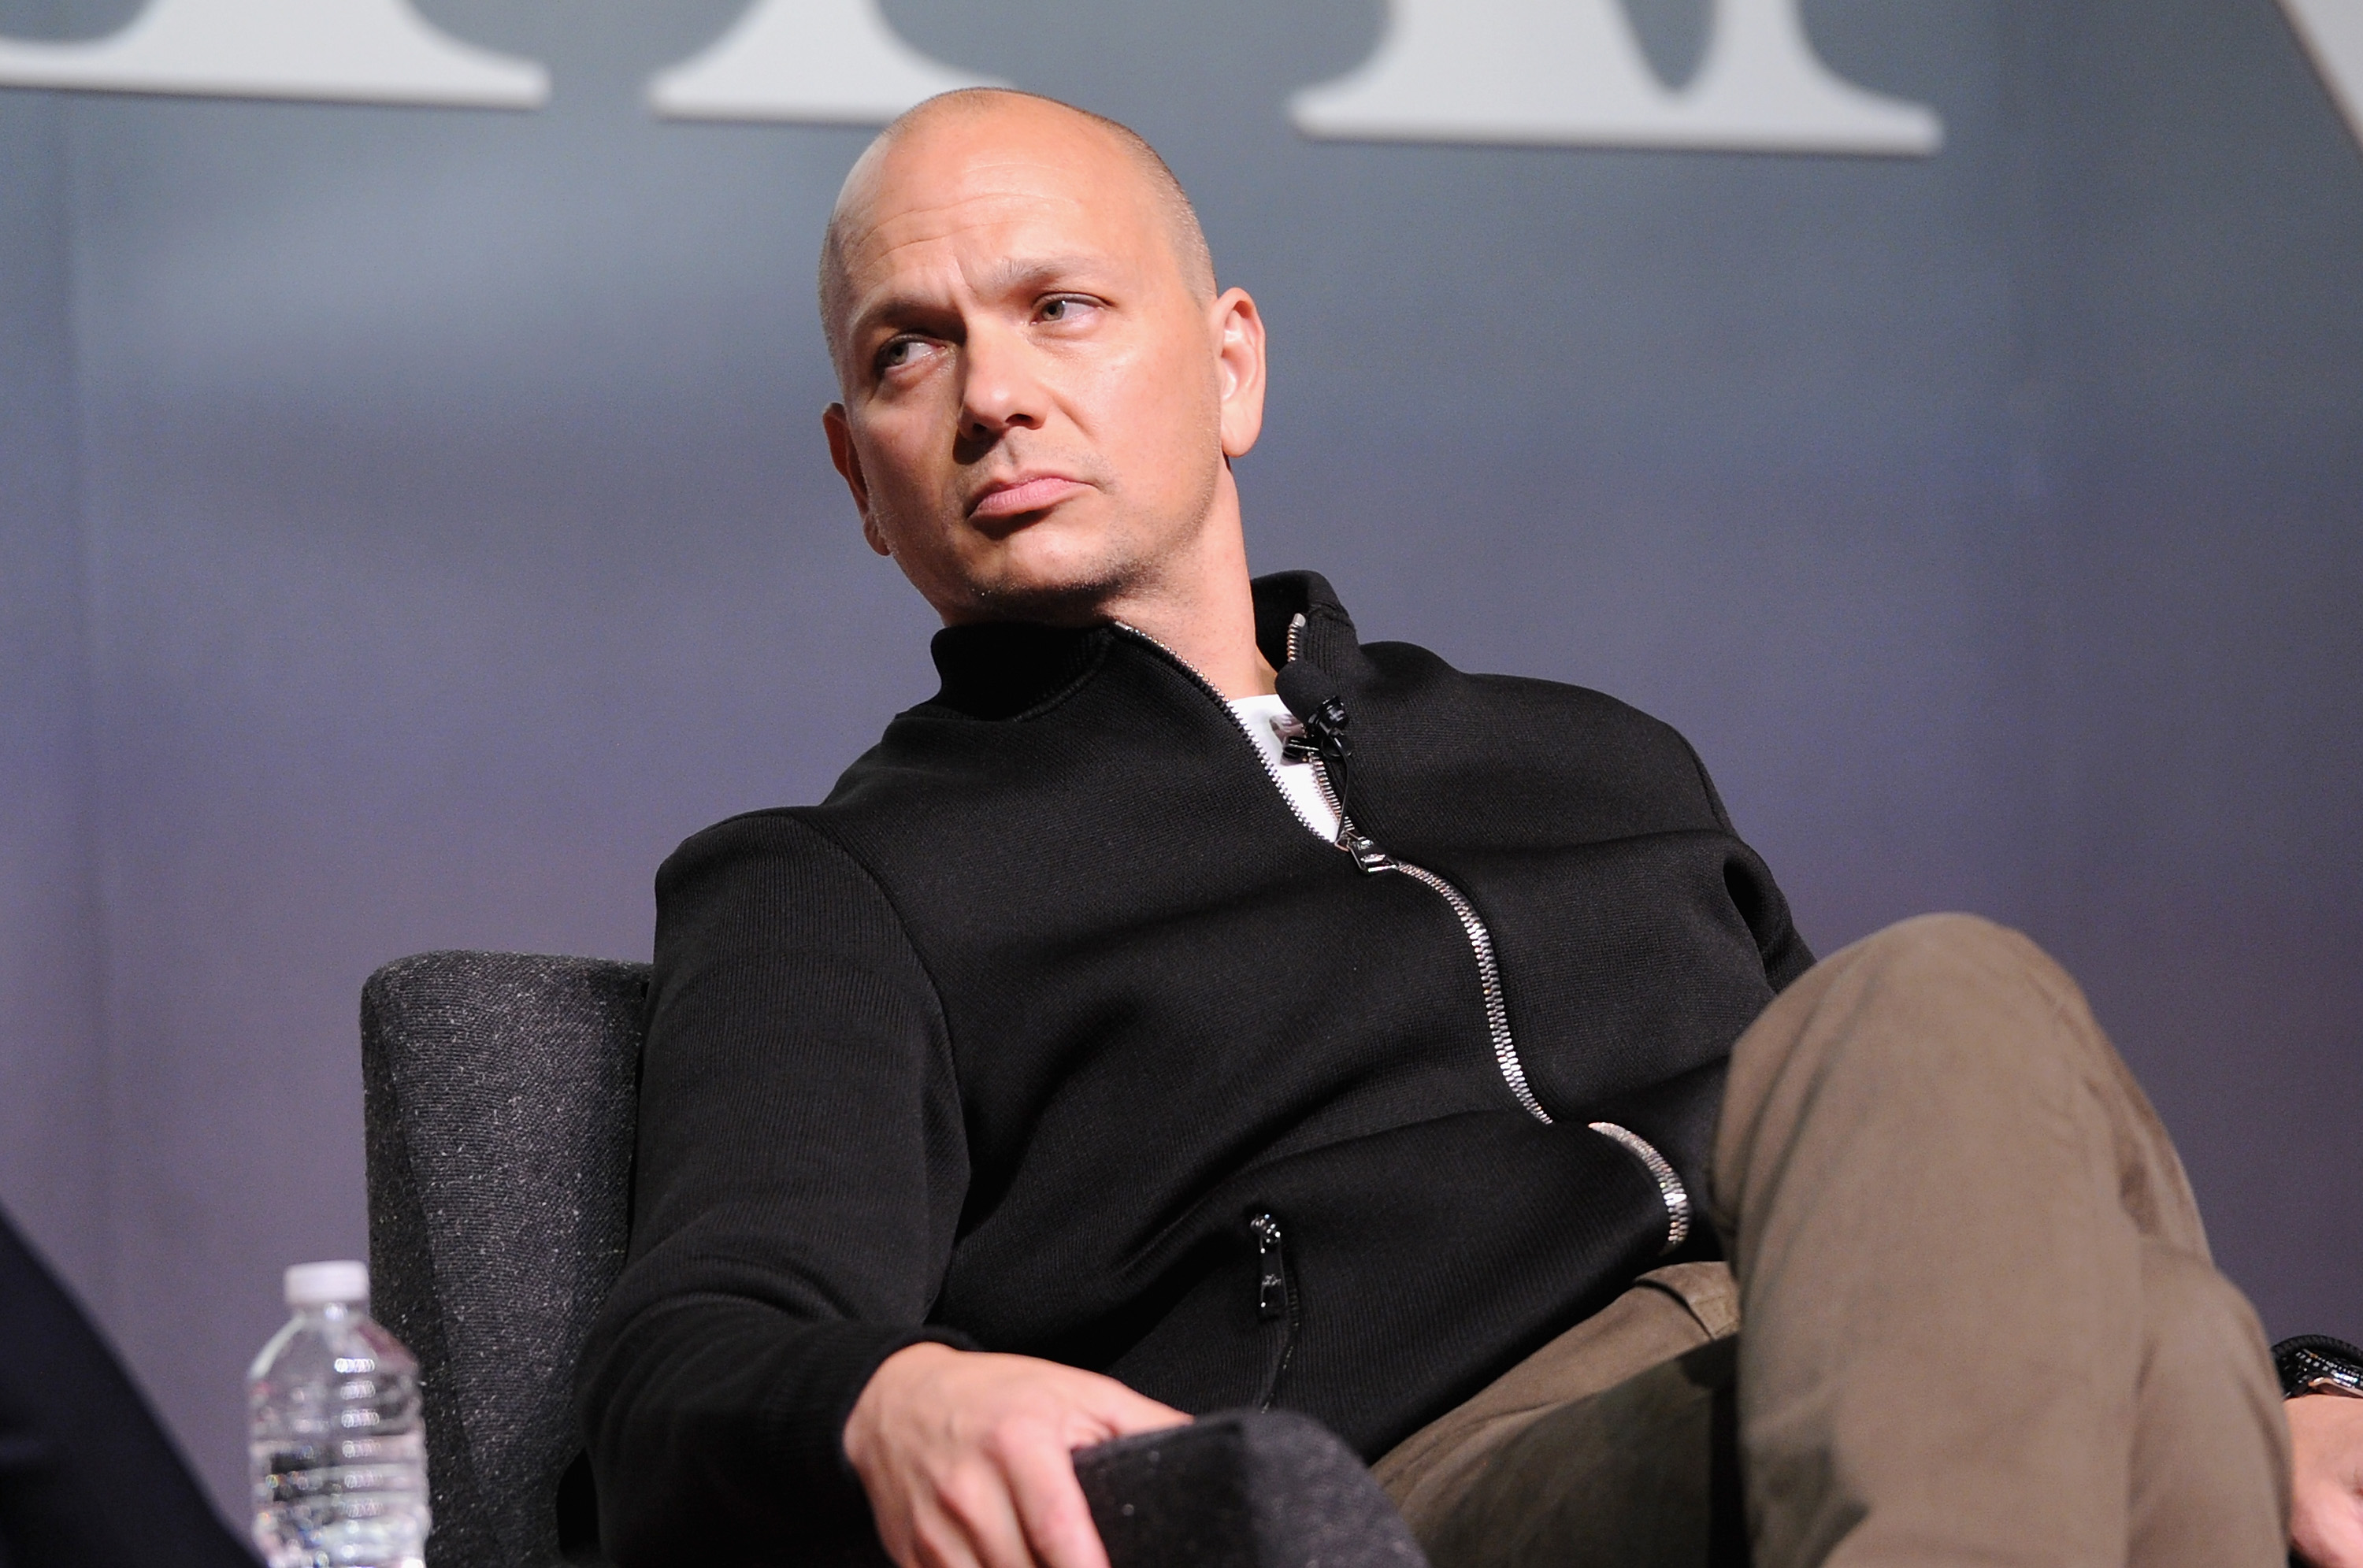 The Fast Company Innovation Festival - The Power Of Design With Tony Fadell And Jared Leto